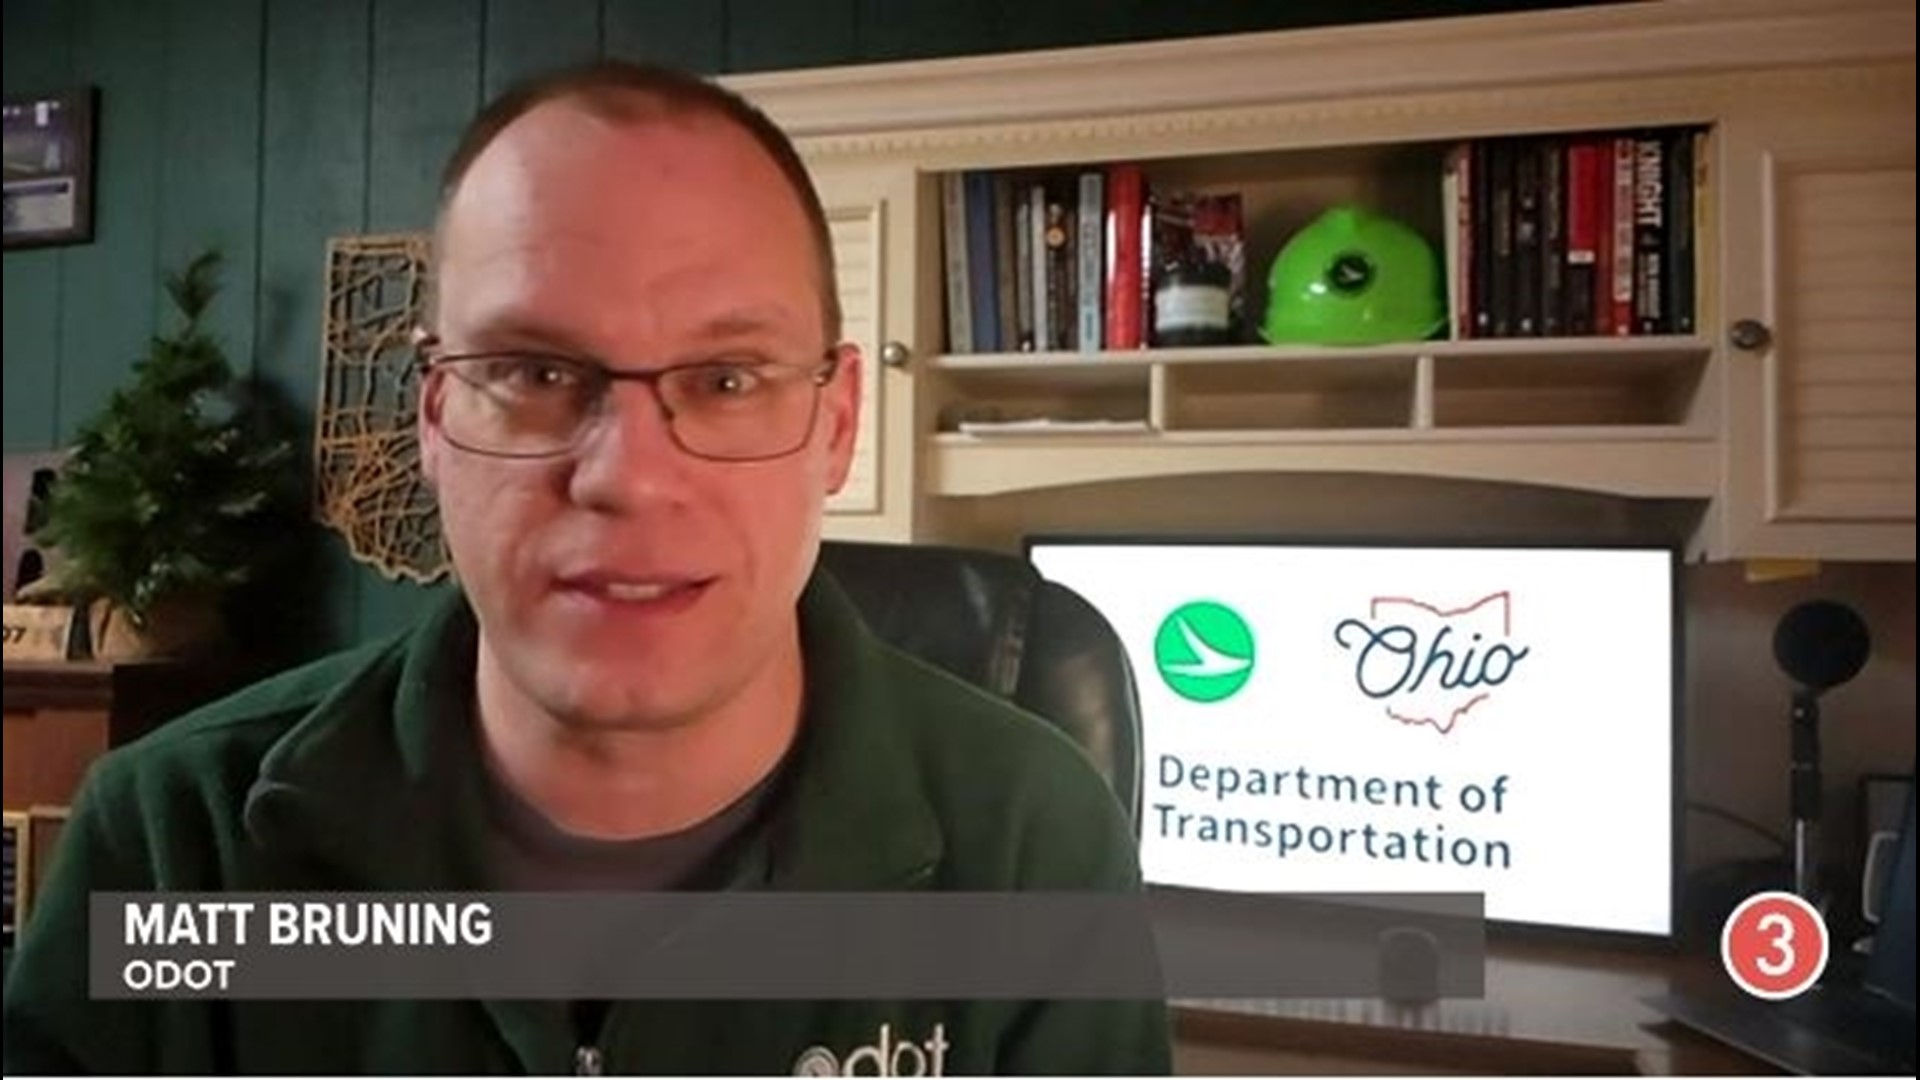 We talk with Matt Bruning of ODOT about what the traffic could be like following Monday's solar eclipse across Ohio.